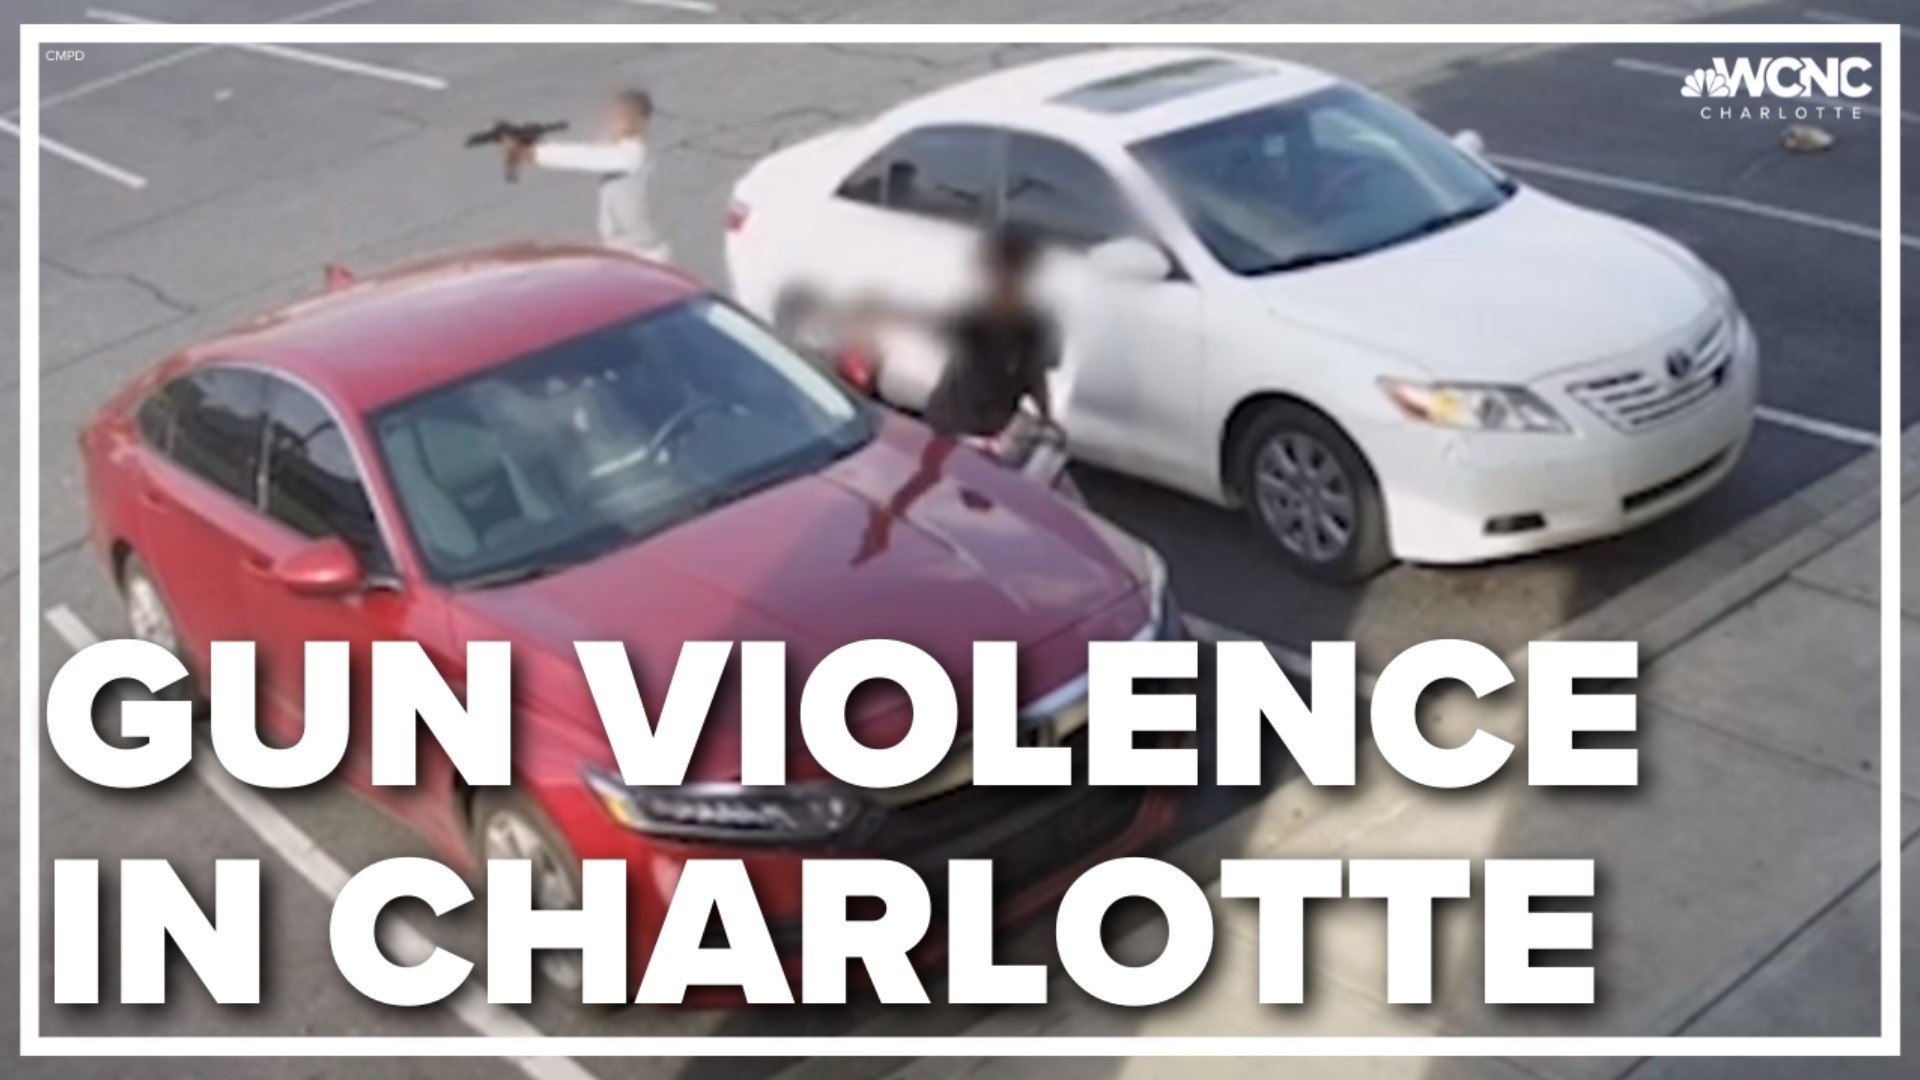 Data from the beginning of 2022 through March shows a solid increase in gun violence across Charlotte, and quieter neighborhoods are experiencing it.